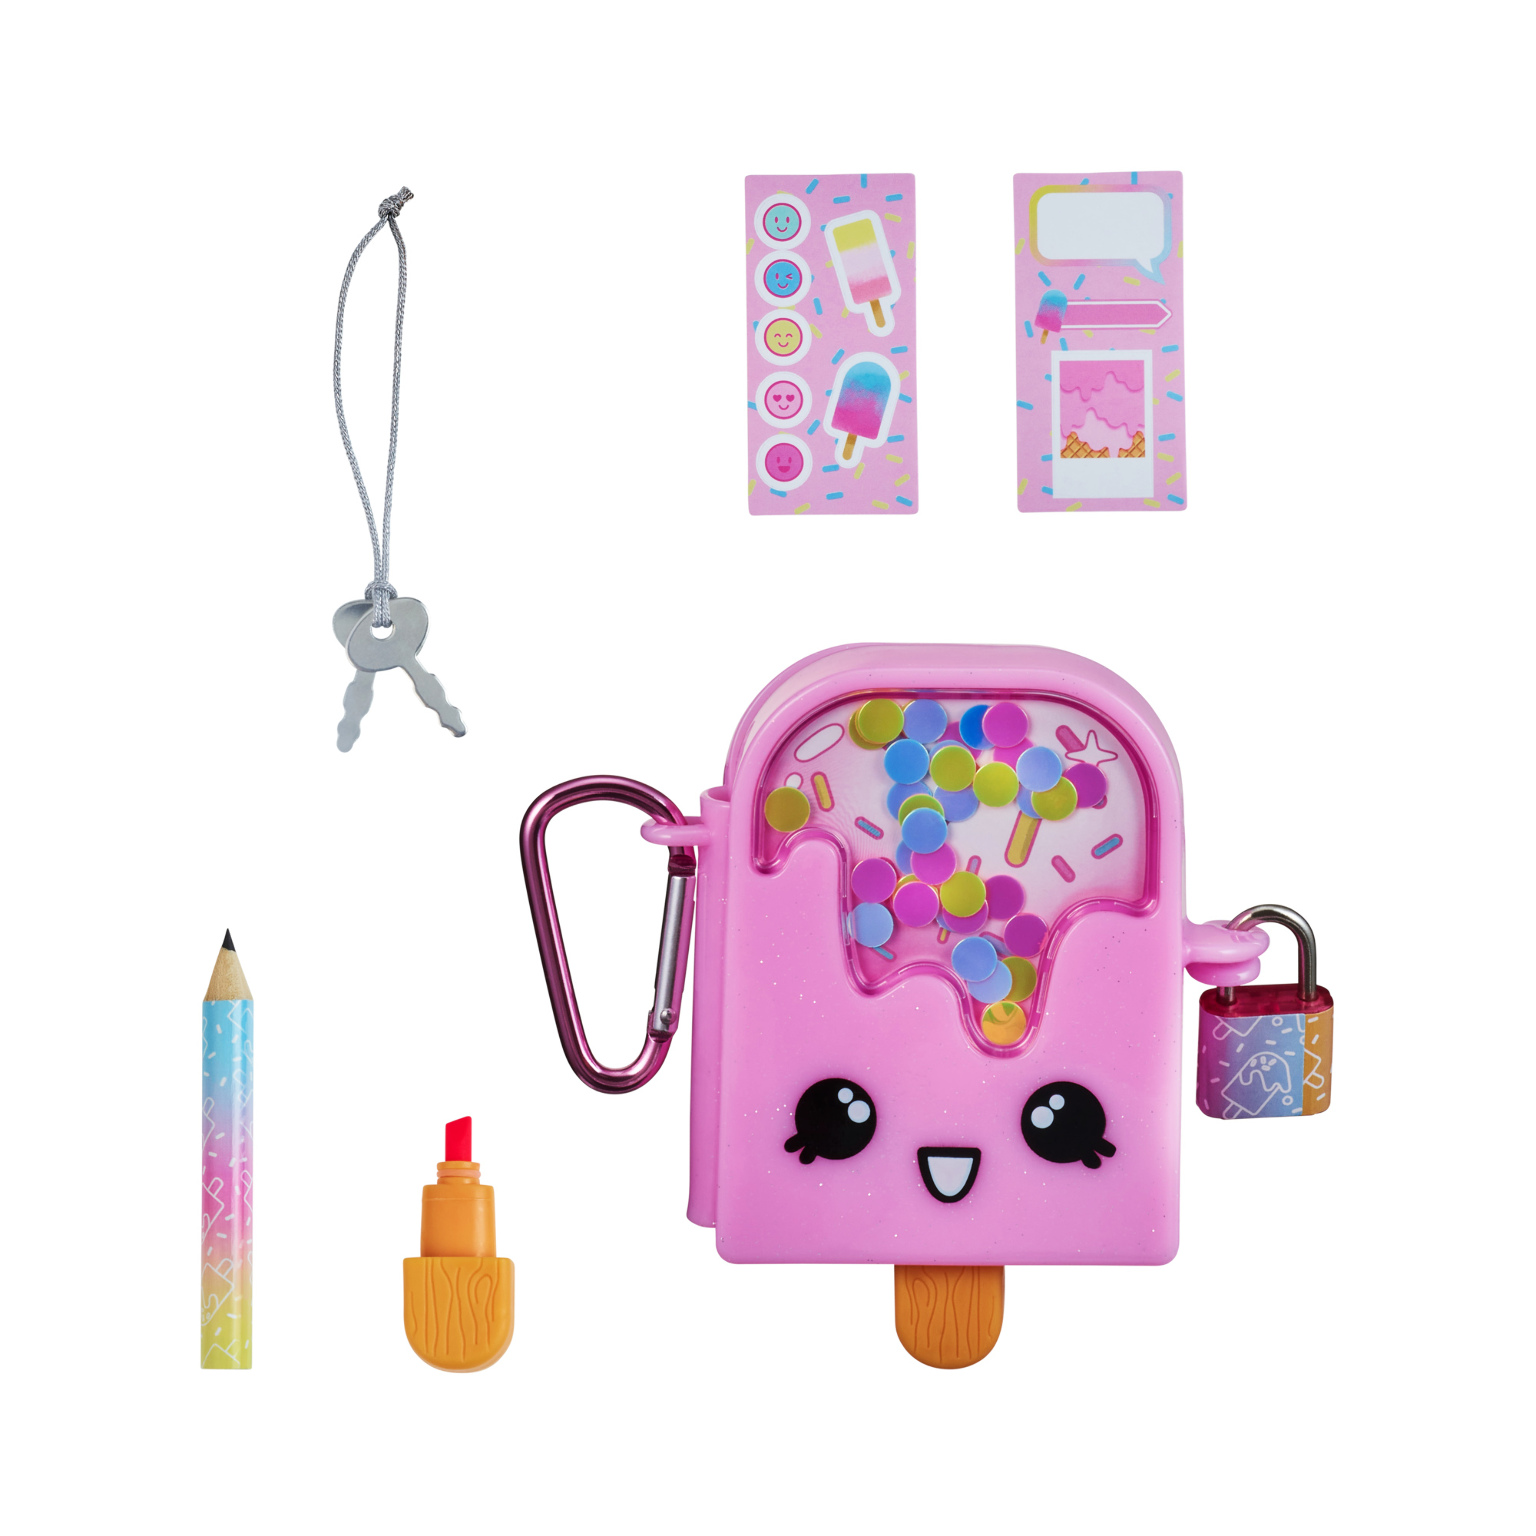 Wholesale Real Littles™ Journal Packs in 12pc Counter Display